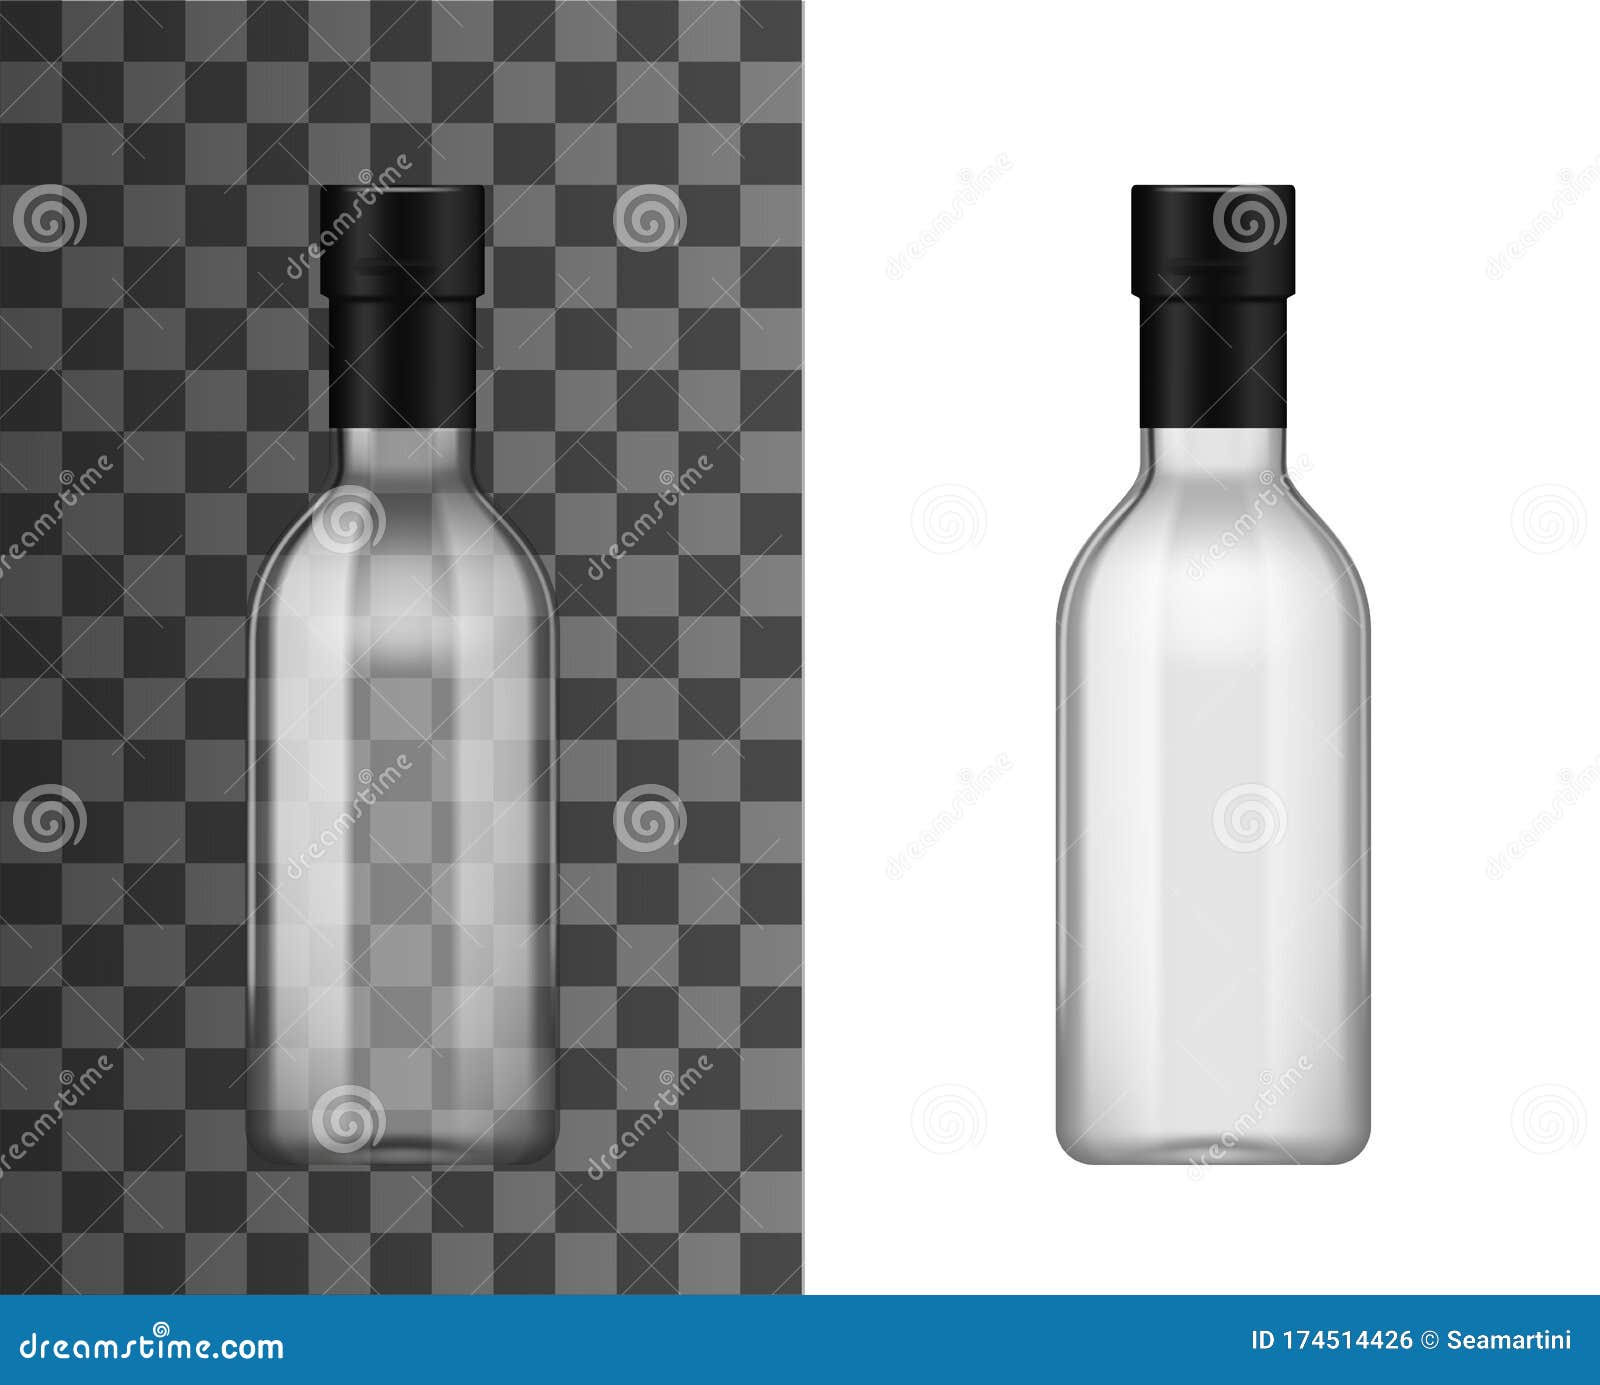 Download Glass Bottle, Alcohol Drink Or Cooking Oil Mockup Stock ...